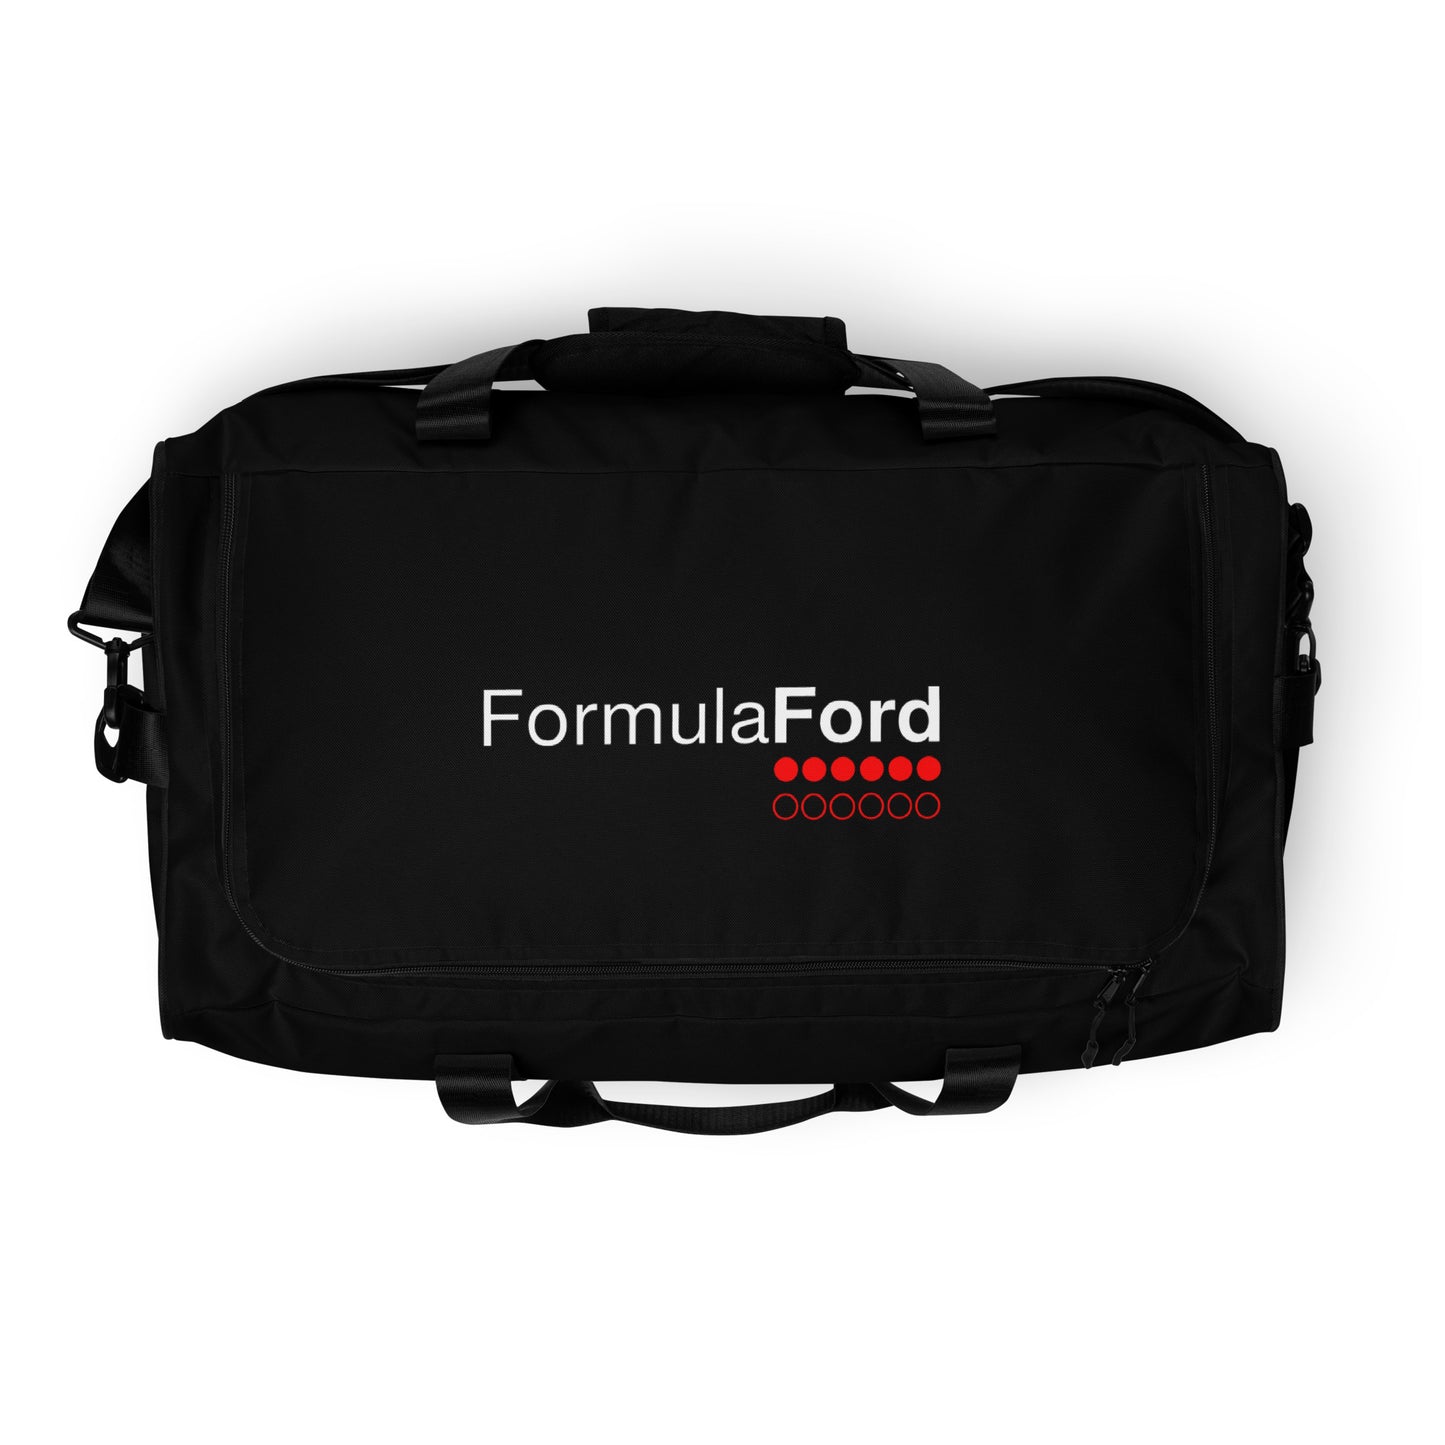 FORMULA FORD Official Waterproof Duffle bag - Large - Full carbon